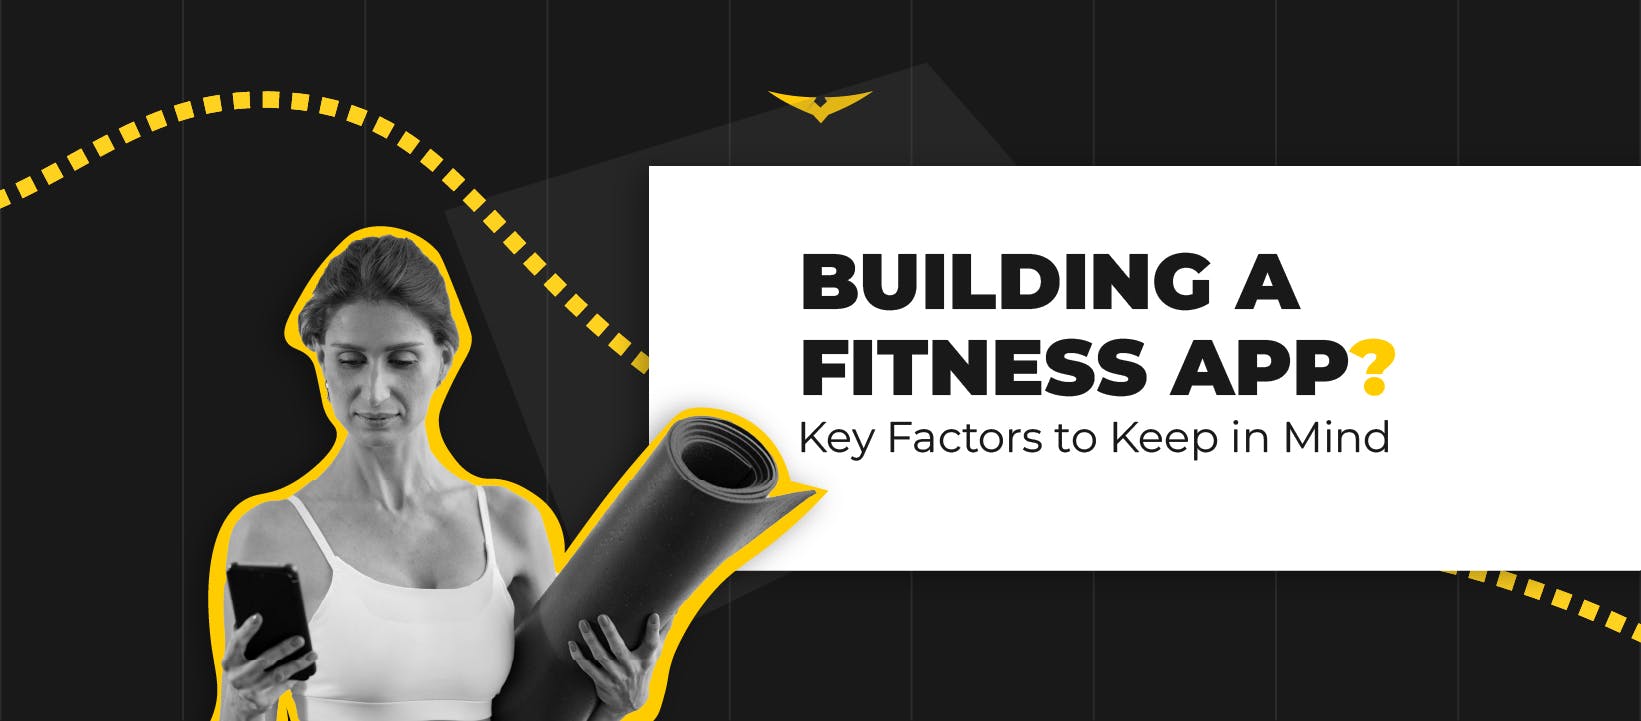 Building a Fitness App? Key Factors to Keep in Mind  